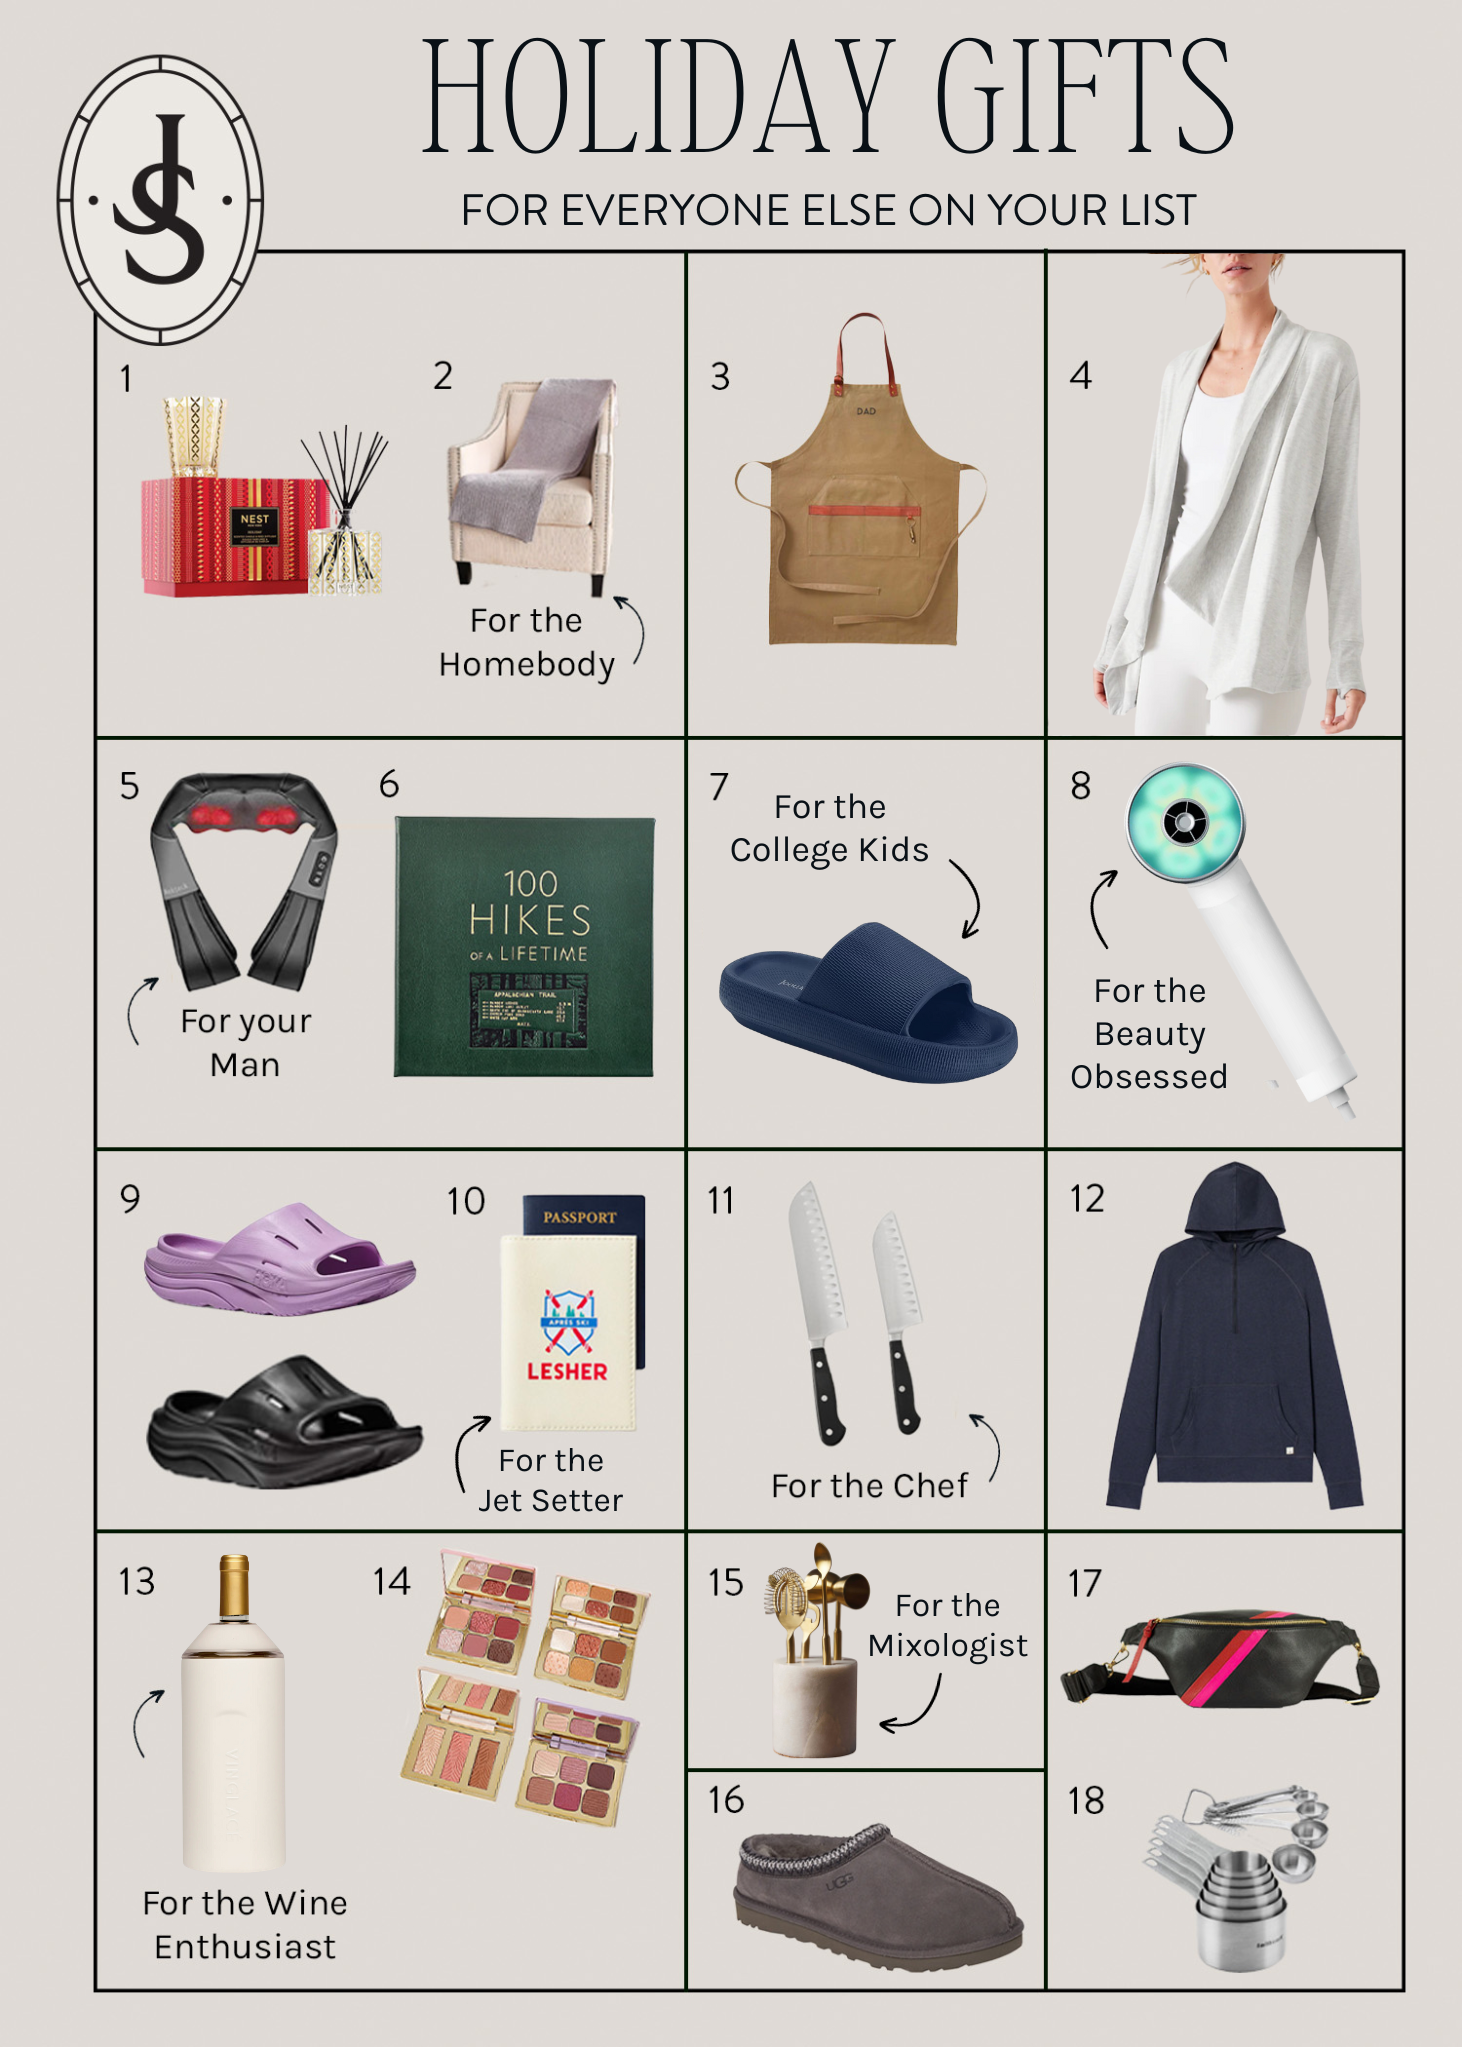 Holiday Gift List for Couples: gifts that work for him or her or